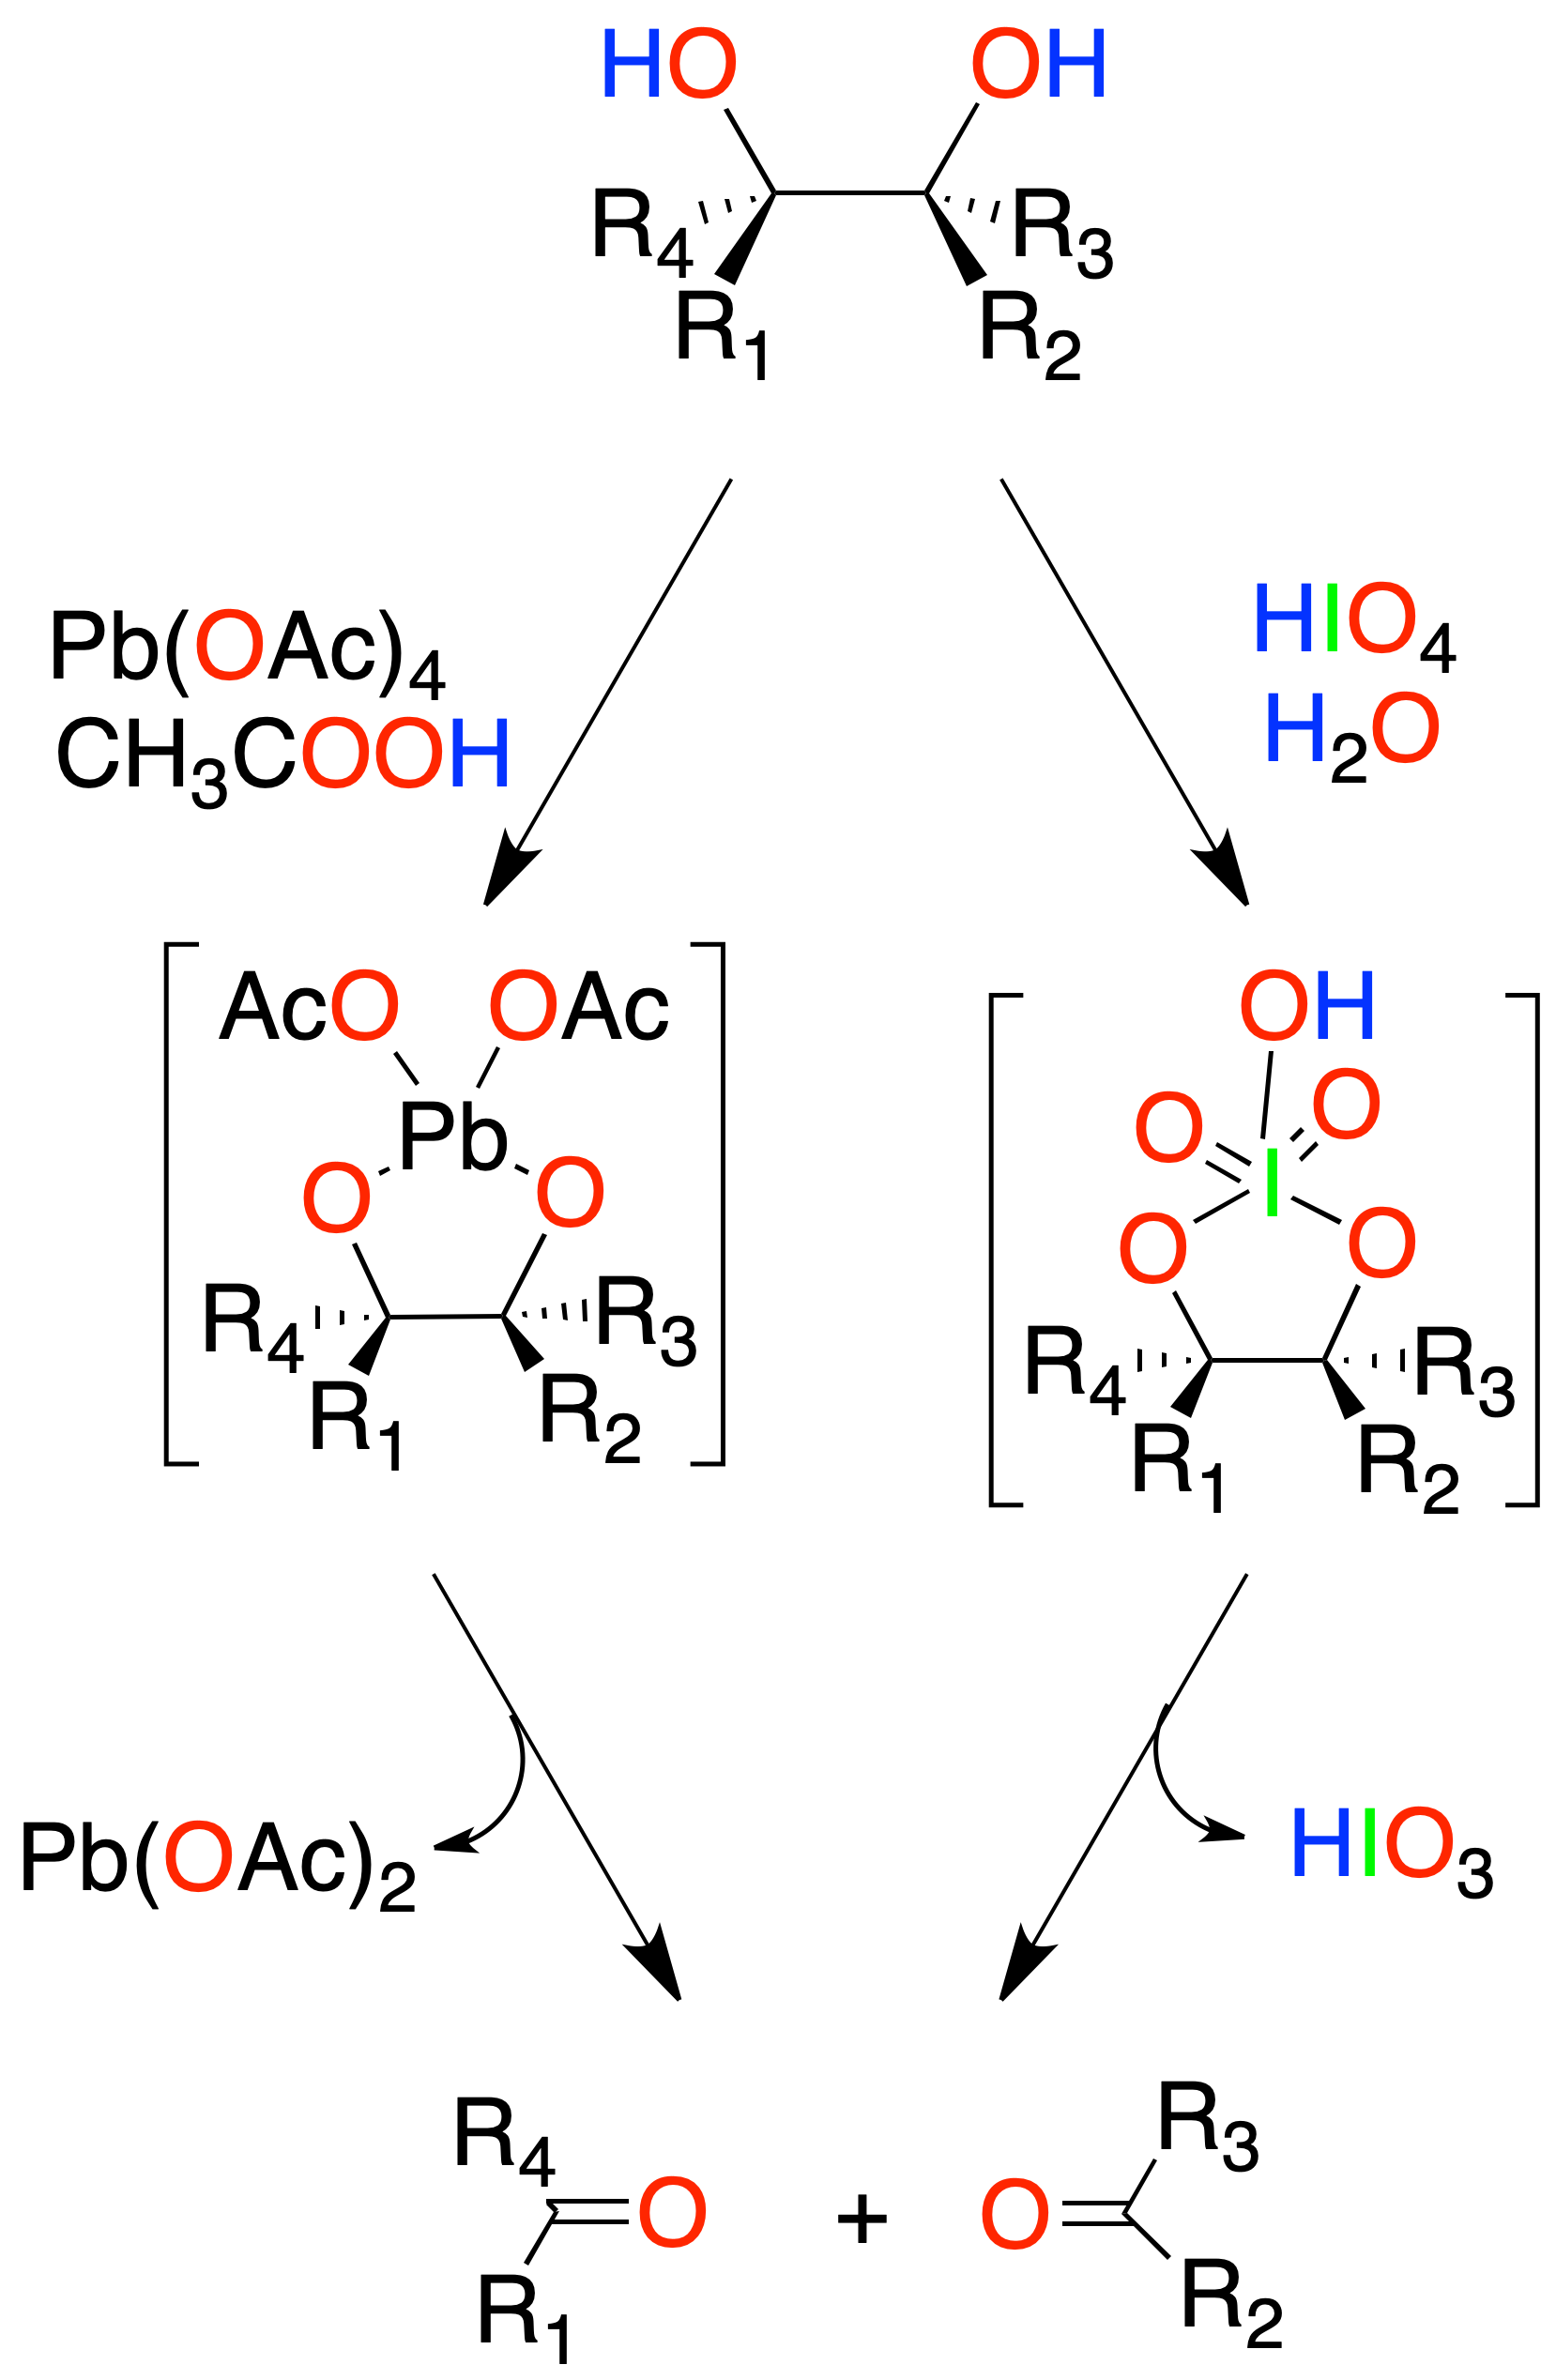 Reactions of Alcohols, Ethers and Oxiranes: Deoxygenation of alcohols (reduction); Oxidation of 1,2-diols